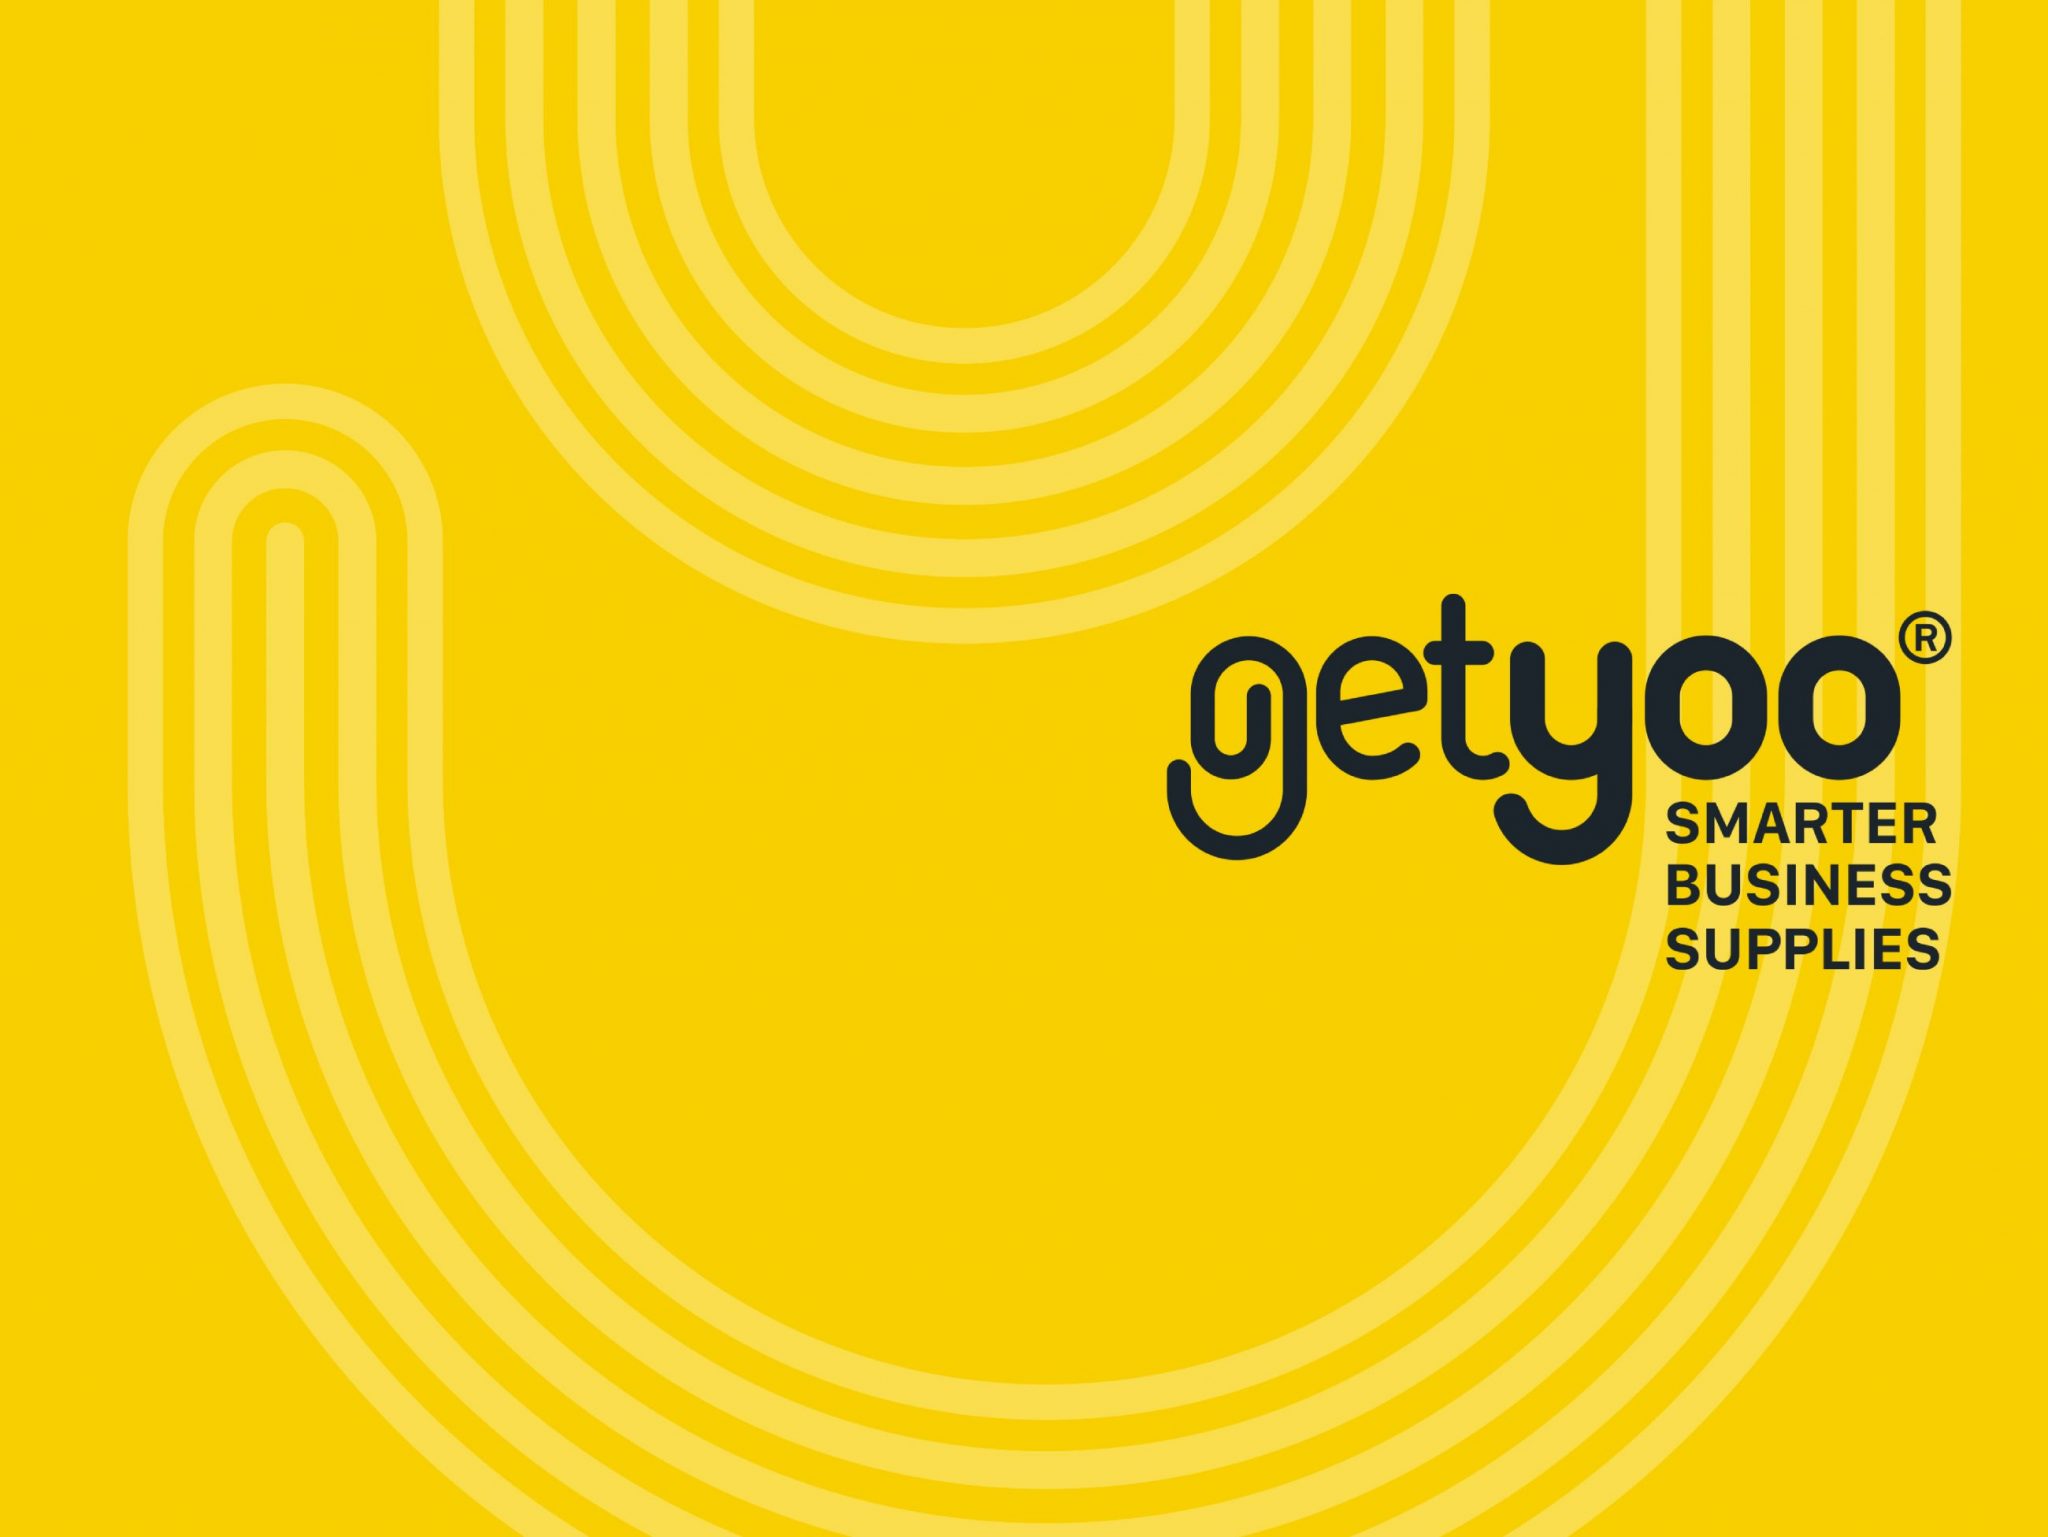 Rebrand logo and visual identity for stationery supplier GetYoo